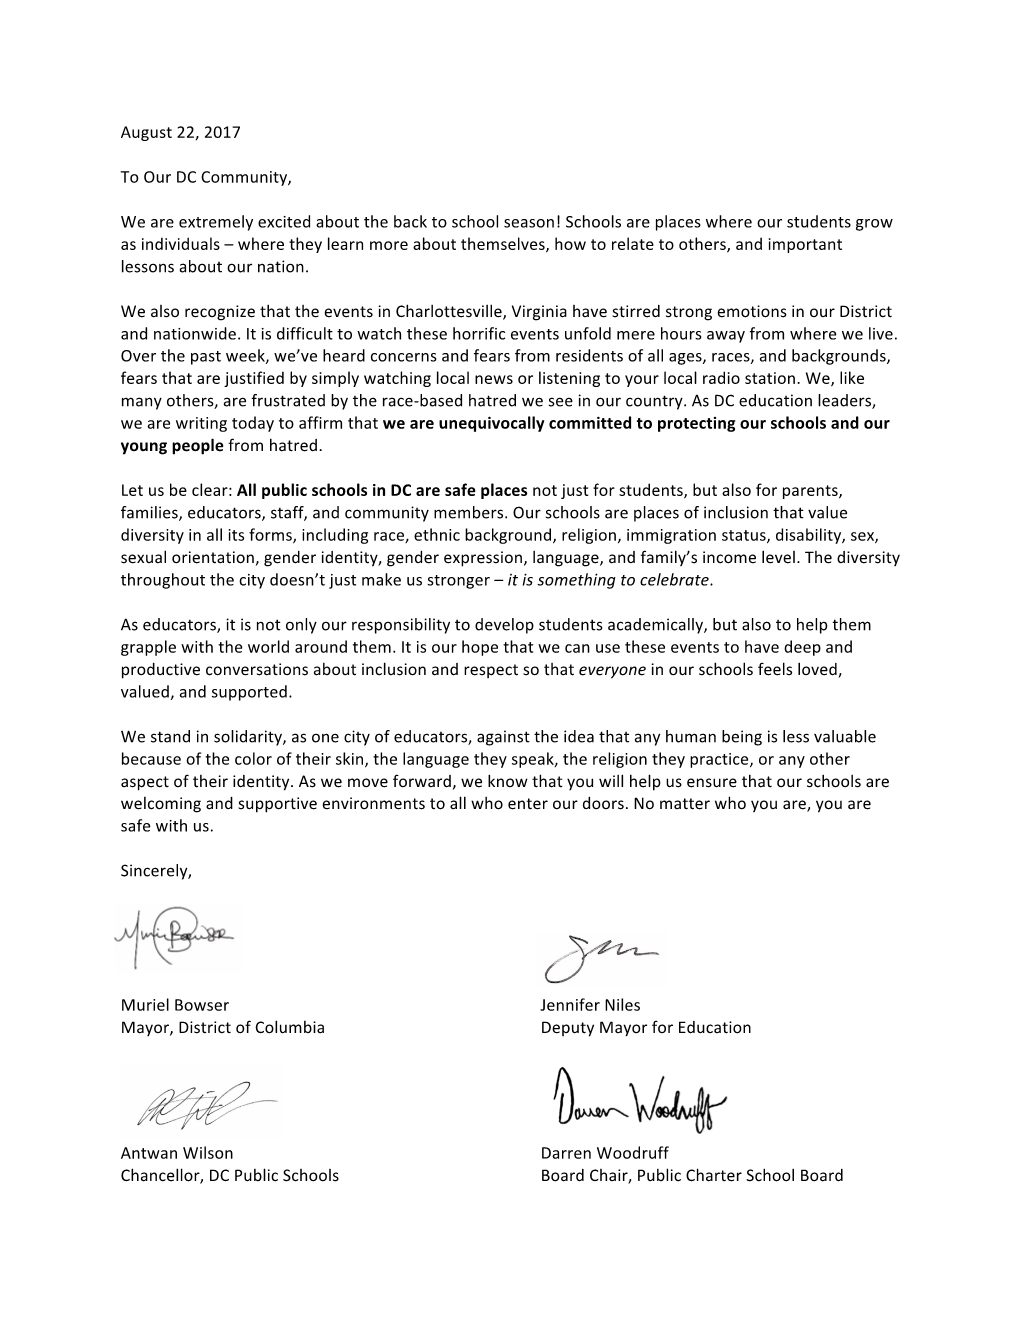 Letter from Education Leaders in DC